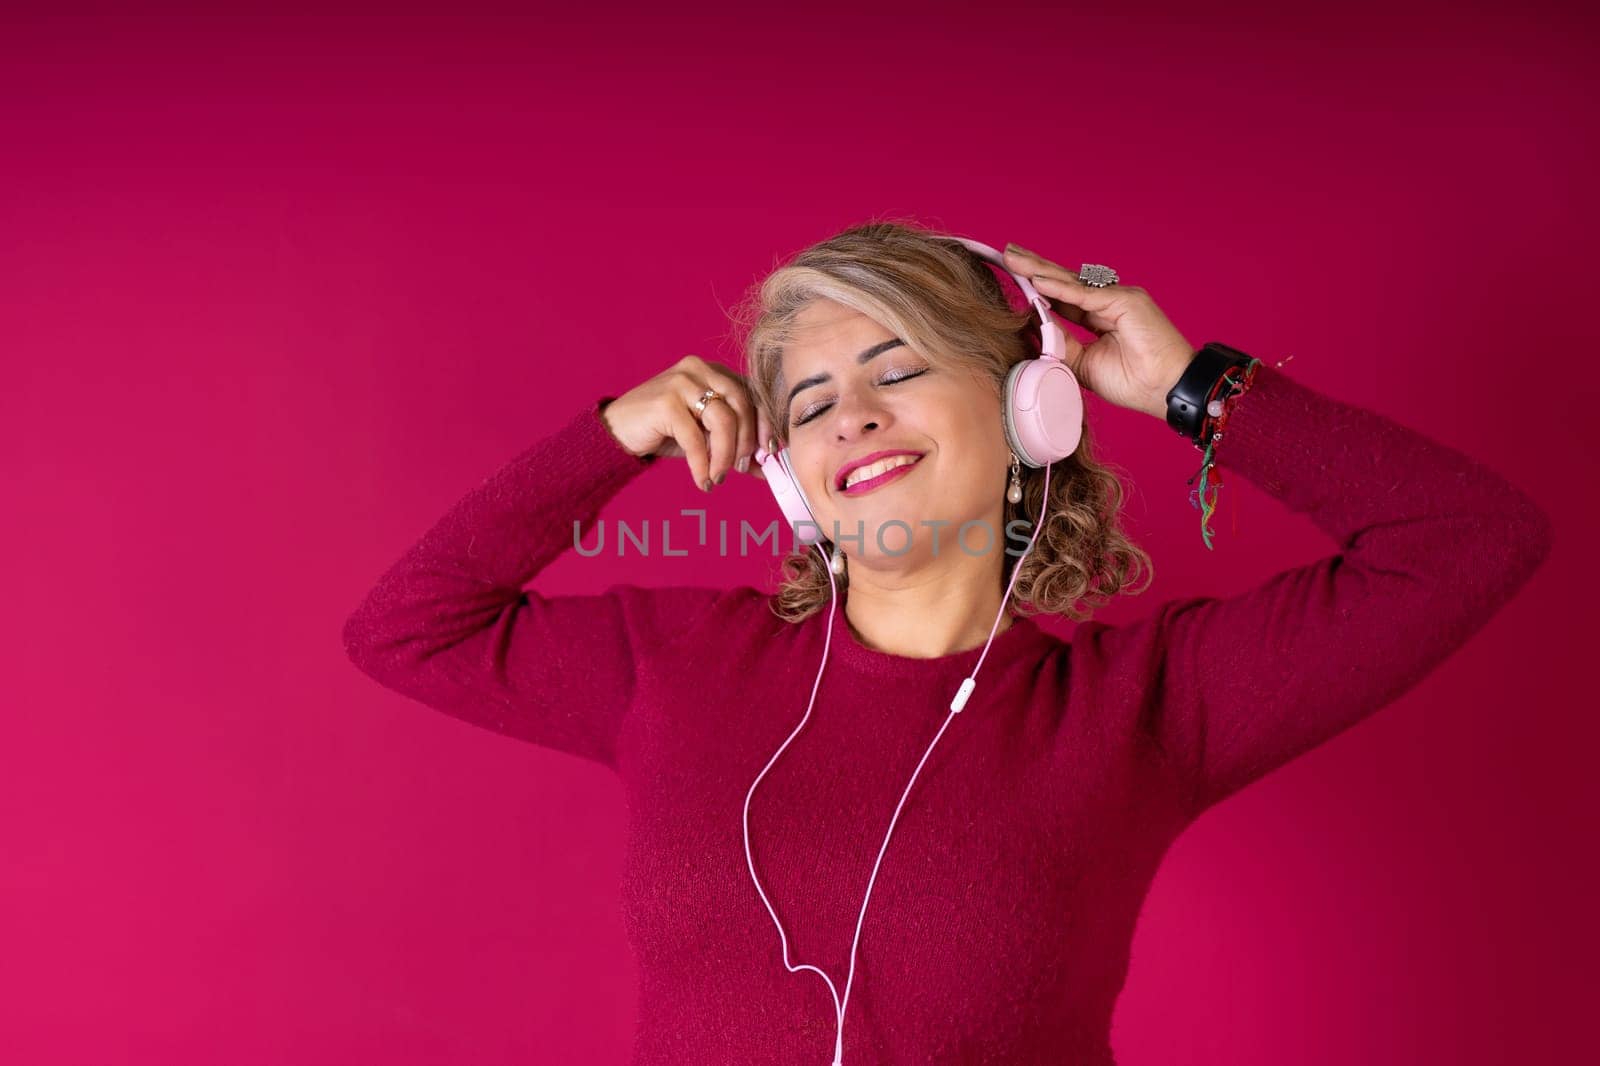 A woman is wearing headphones and smiling while listening to music. Concept of relaxation and enjoyment as the woman immerses herself in the music